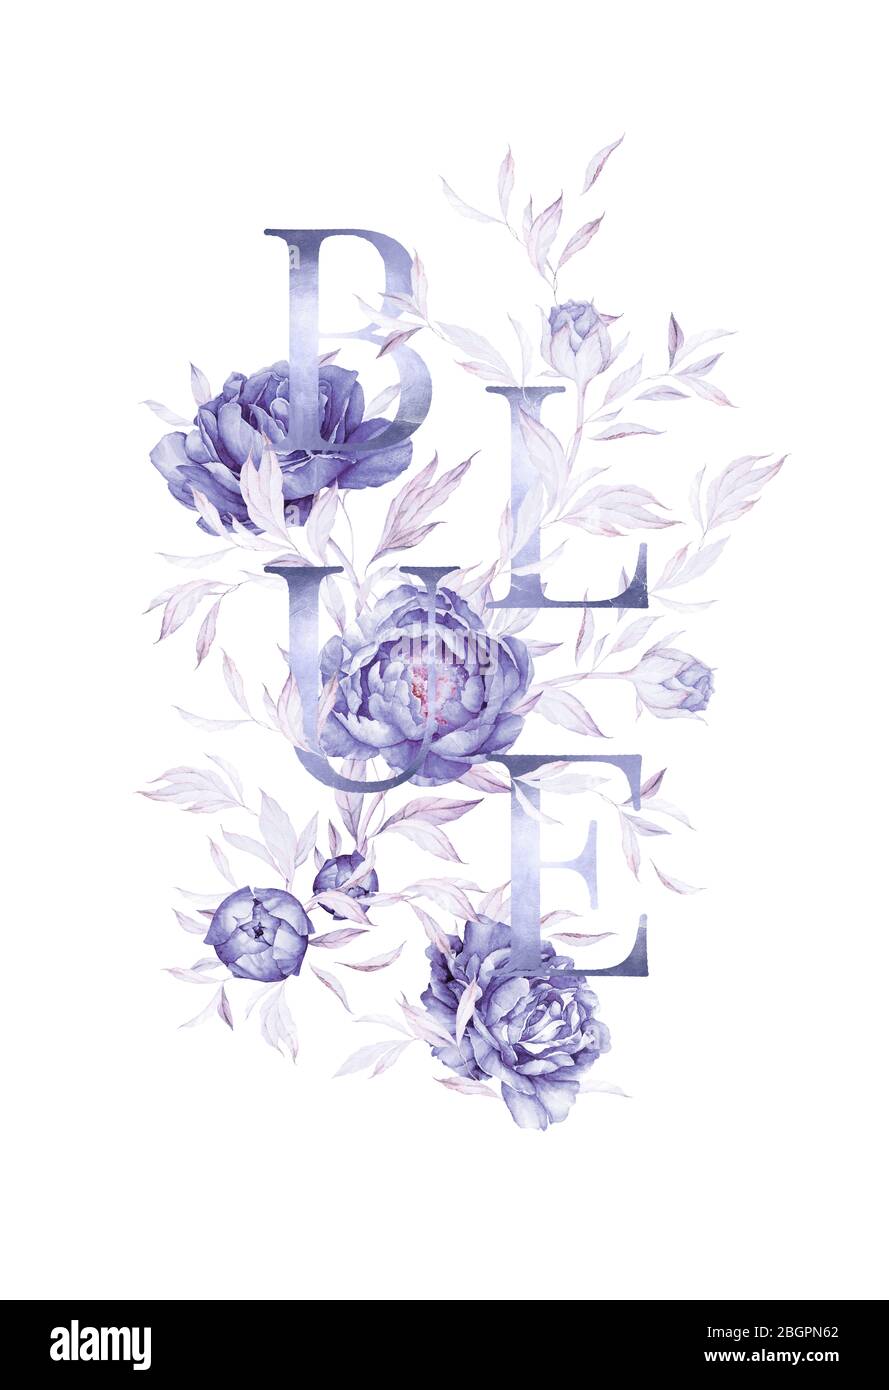 Floral composition. Blue Flowers. Light Blue Lush Leaves. Watercolor flowers. Pre-made Composition. Print quality. White background. Stock Photo